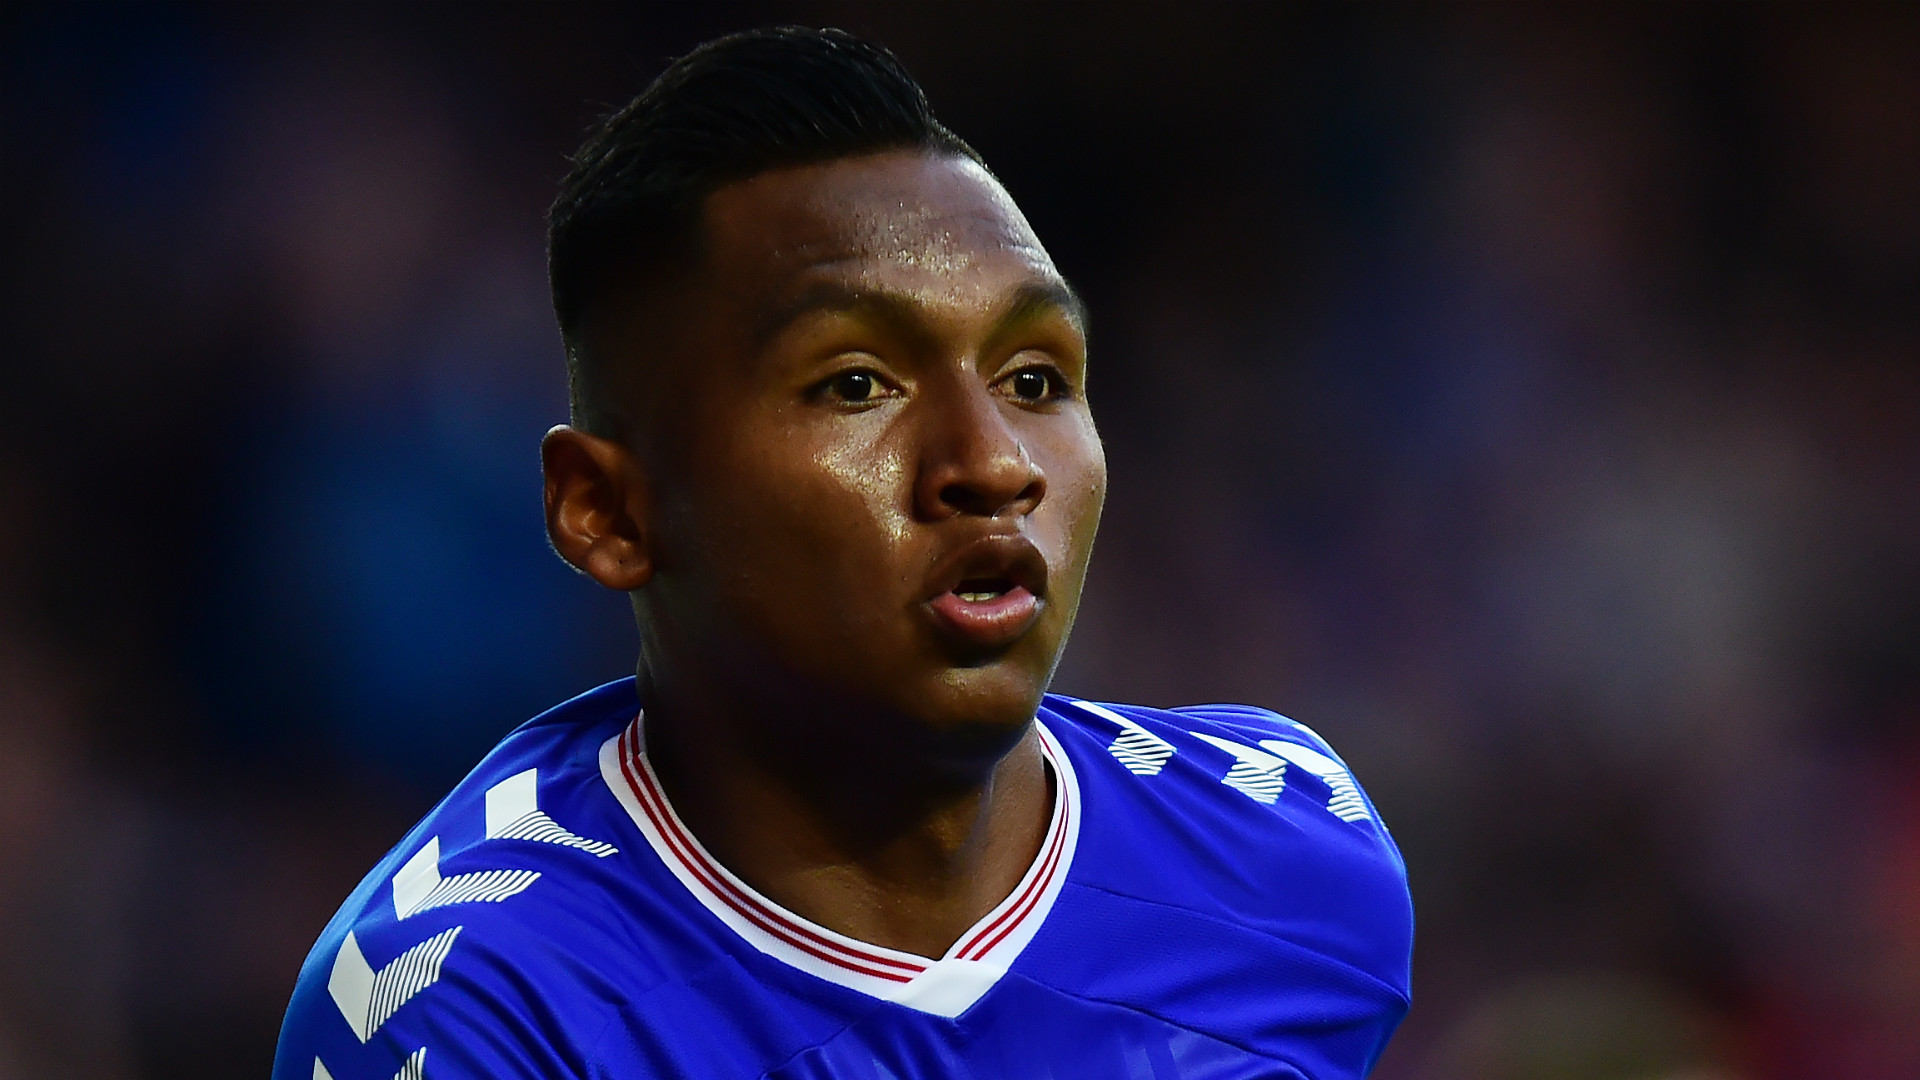 Hearts open investigation after Rangers striker Morelos allegedly suffers racist abuse